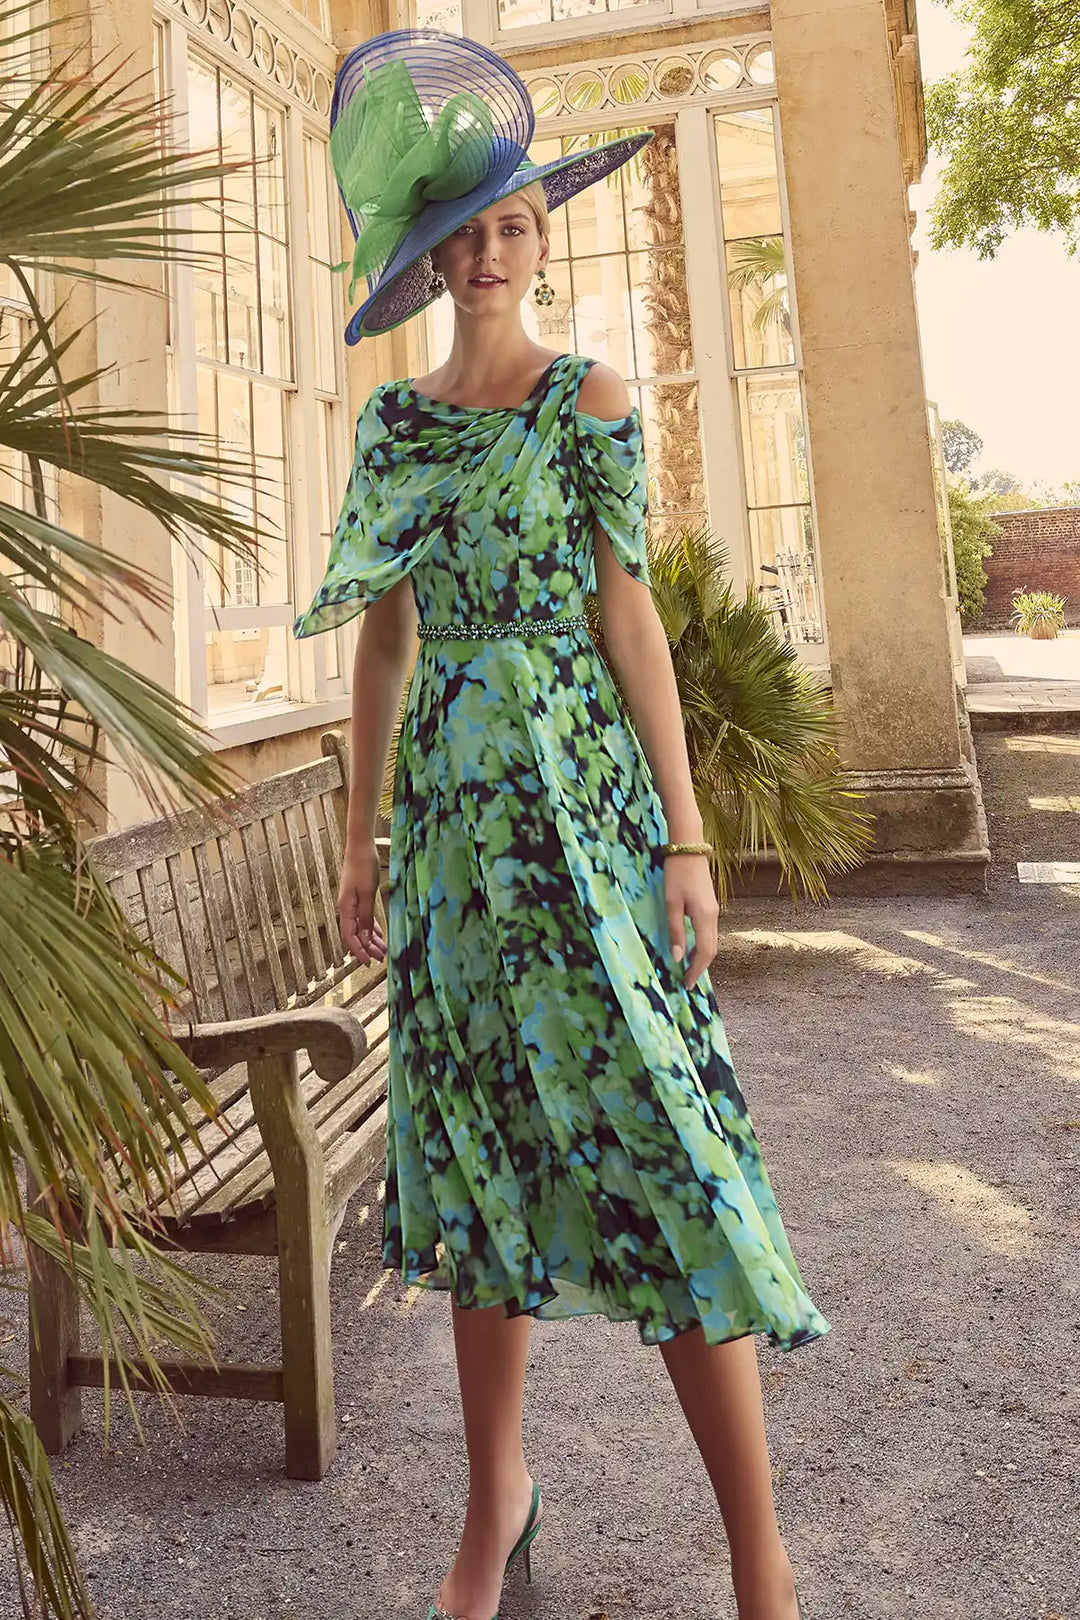 Woman wearing an Invitations by Veni 36028 midi dress with an abstract green, turquoise, and black print, featuring a scoop neckline, dramatic off-the-shoulder cape, delicate glass bead belt, and a flowing pleated skirt.